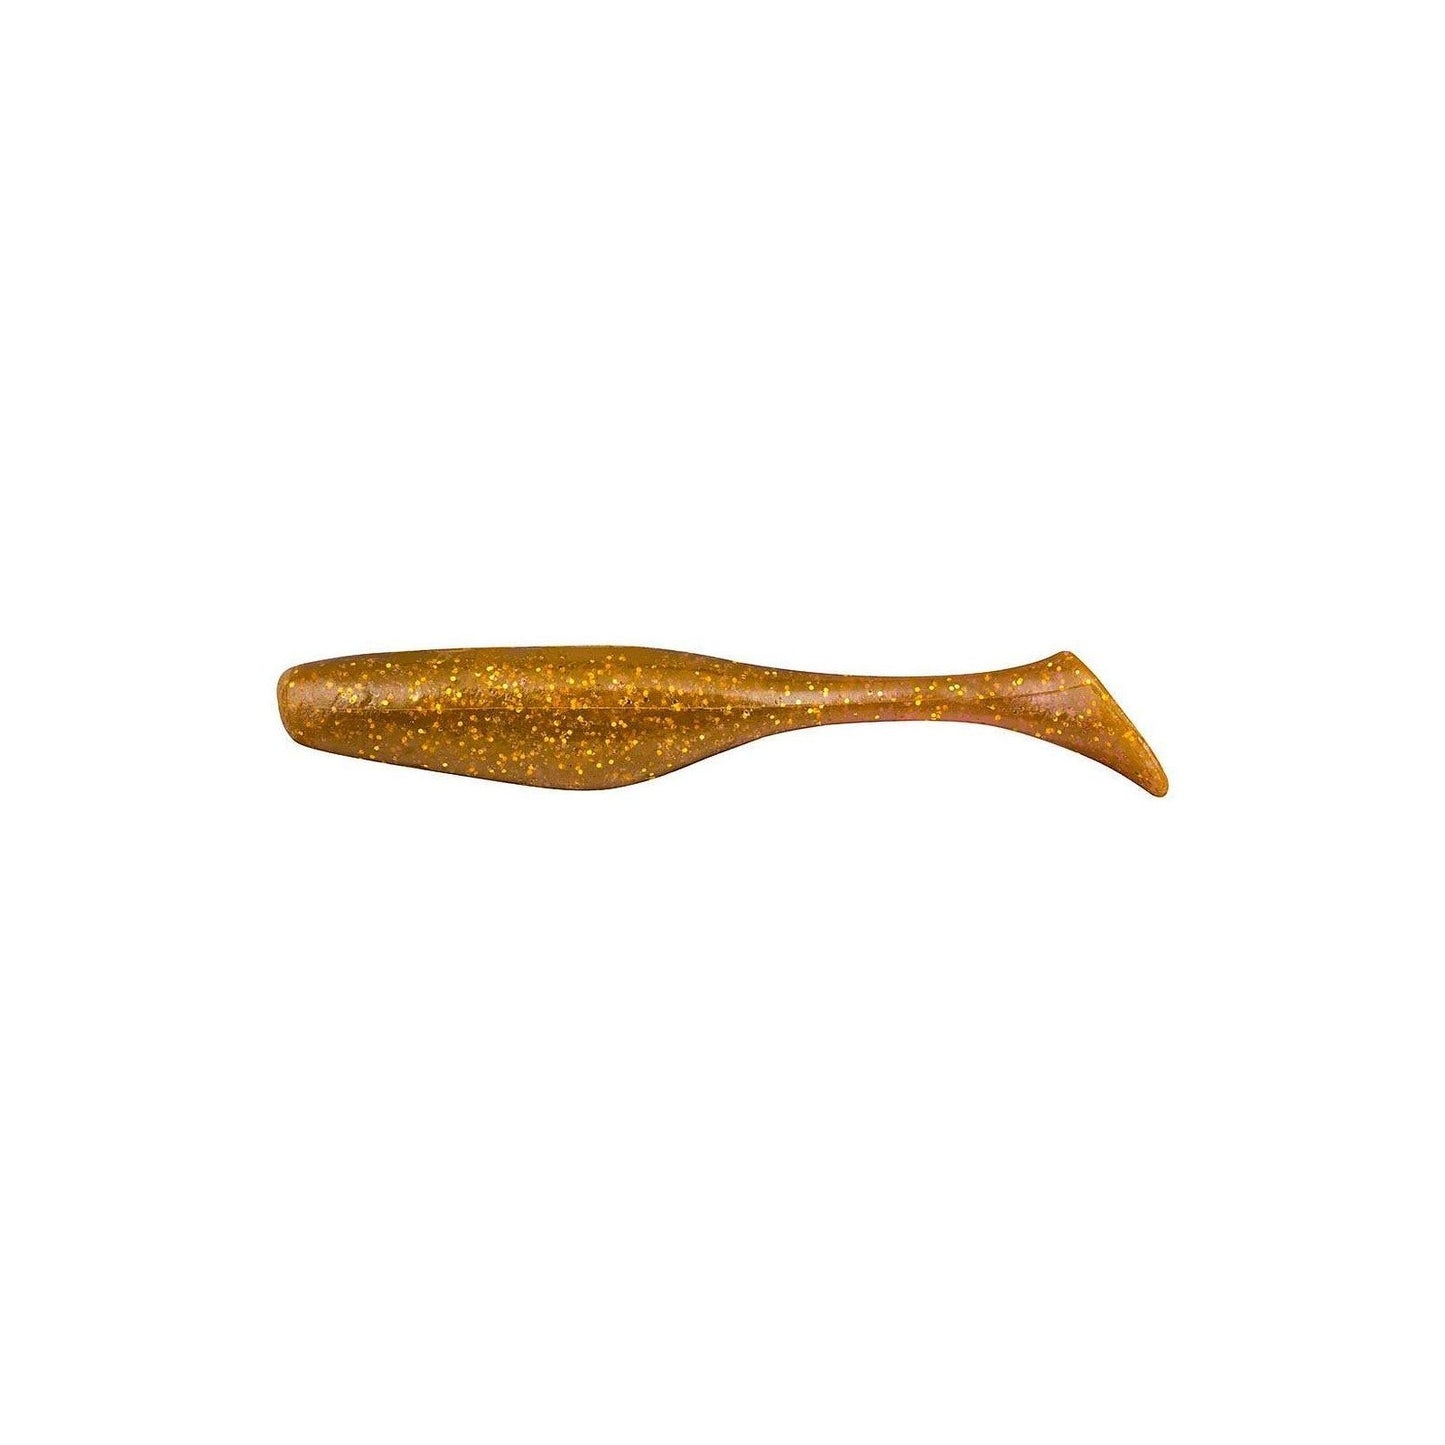 Select Fishing Crazy Shad Gummifisch 999